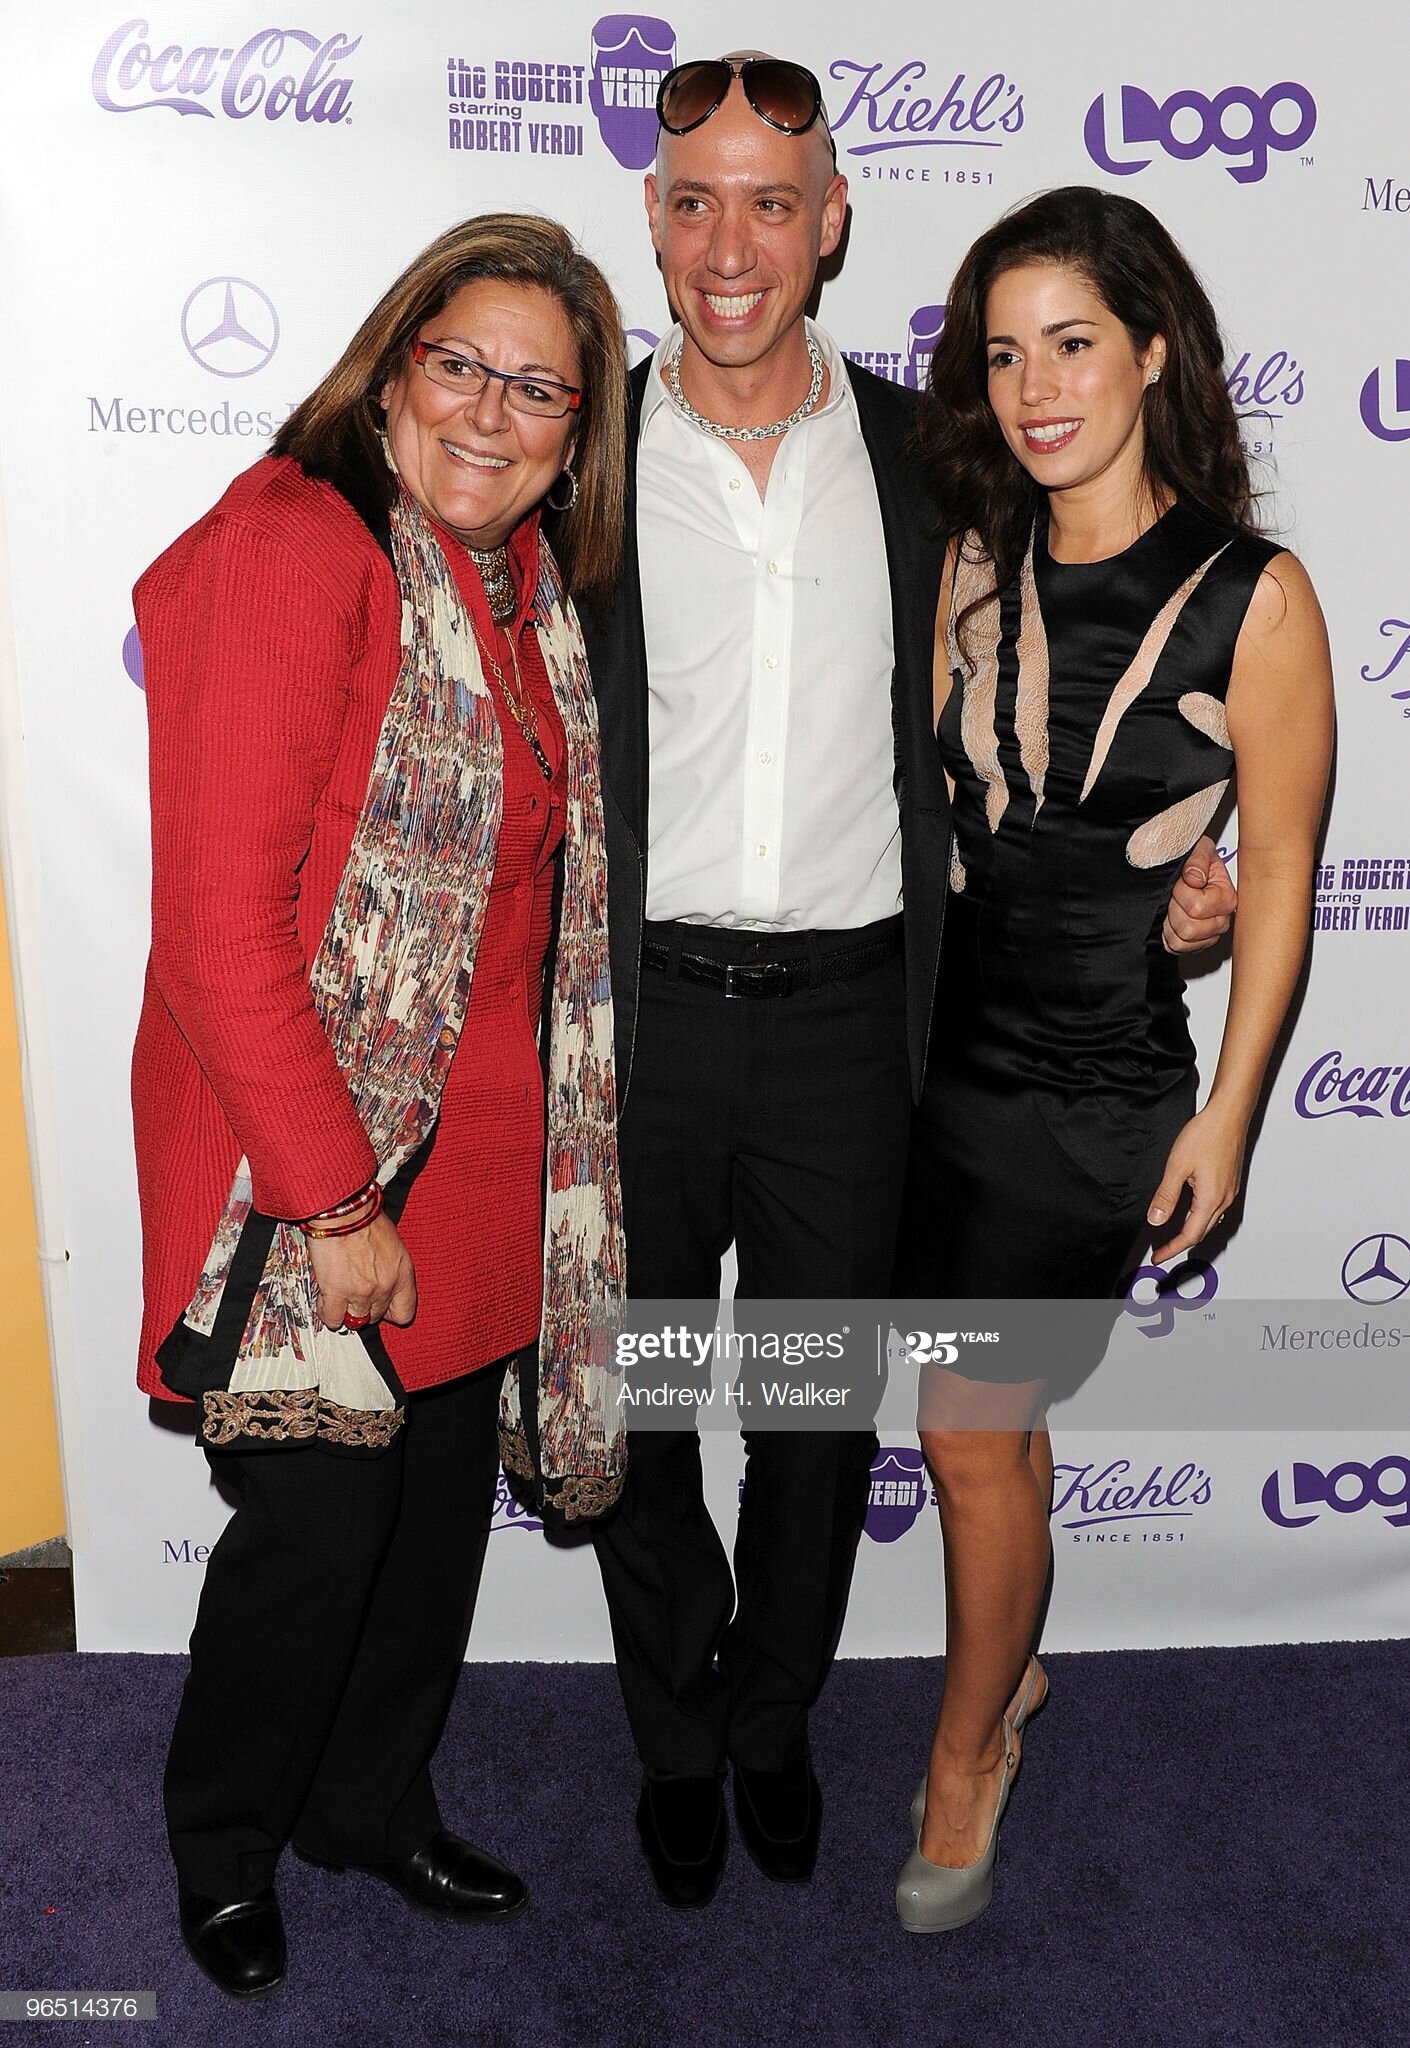  NEW YORK - FEBRUARY 08:  (L-R) Fern Mallis, Robert Verdi and Ana Ortiz attend the premiere screening of "The Robert Verdi Show Starring Robert Verdi" at the SVA Theater on February 8, 2010 in New York City.  (Photo by Andrew H. Walker/Getty Images) 